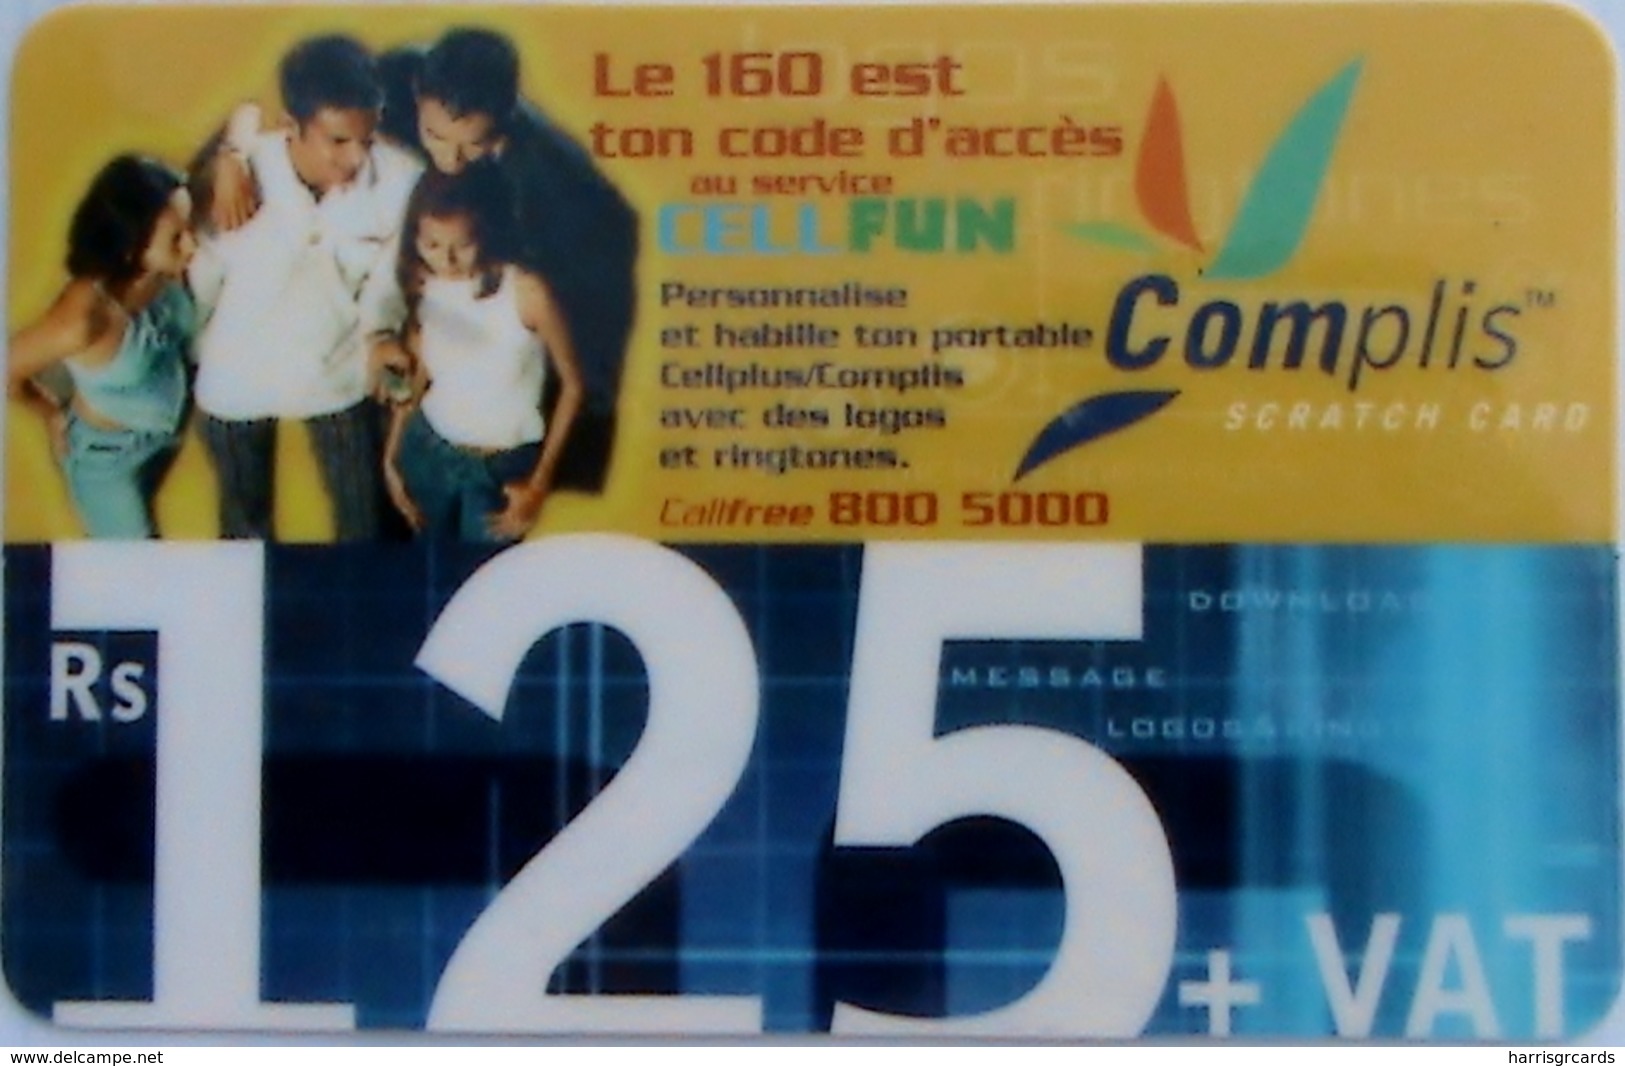 MAURITIUS ISLAND - Two Girlls Two Boys, Cellplus Complis Recharge, 125 &#x20A8;, Used - Mauritius